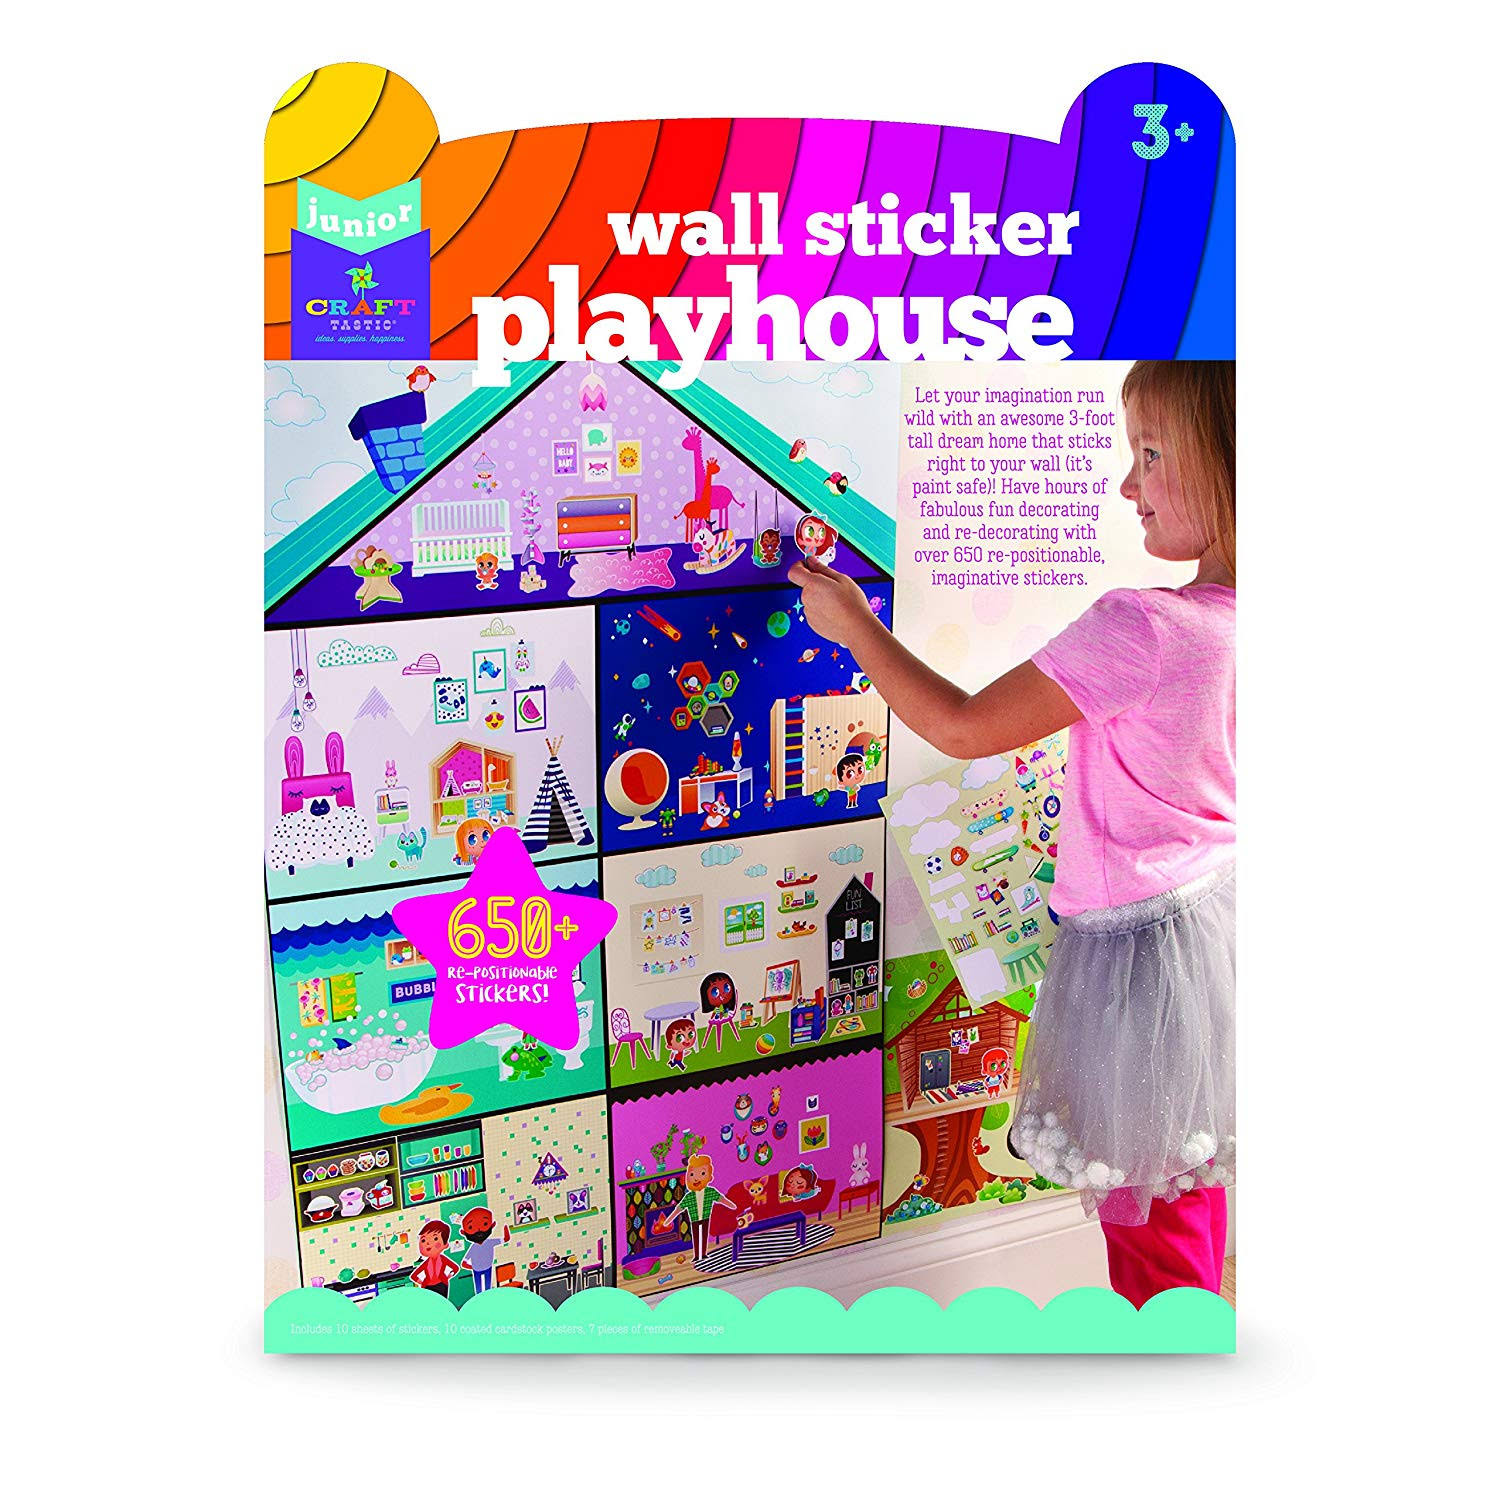 (Playhouse) - Craft-tastic Jr – Wall Sticker Playhouse – 0.9m Tall Dreamhouse with Over 650 Reusable Stickers